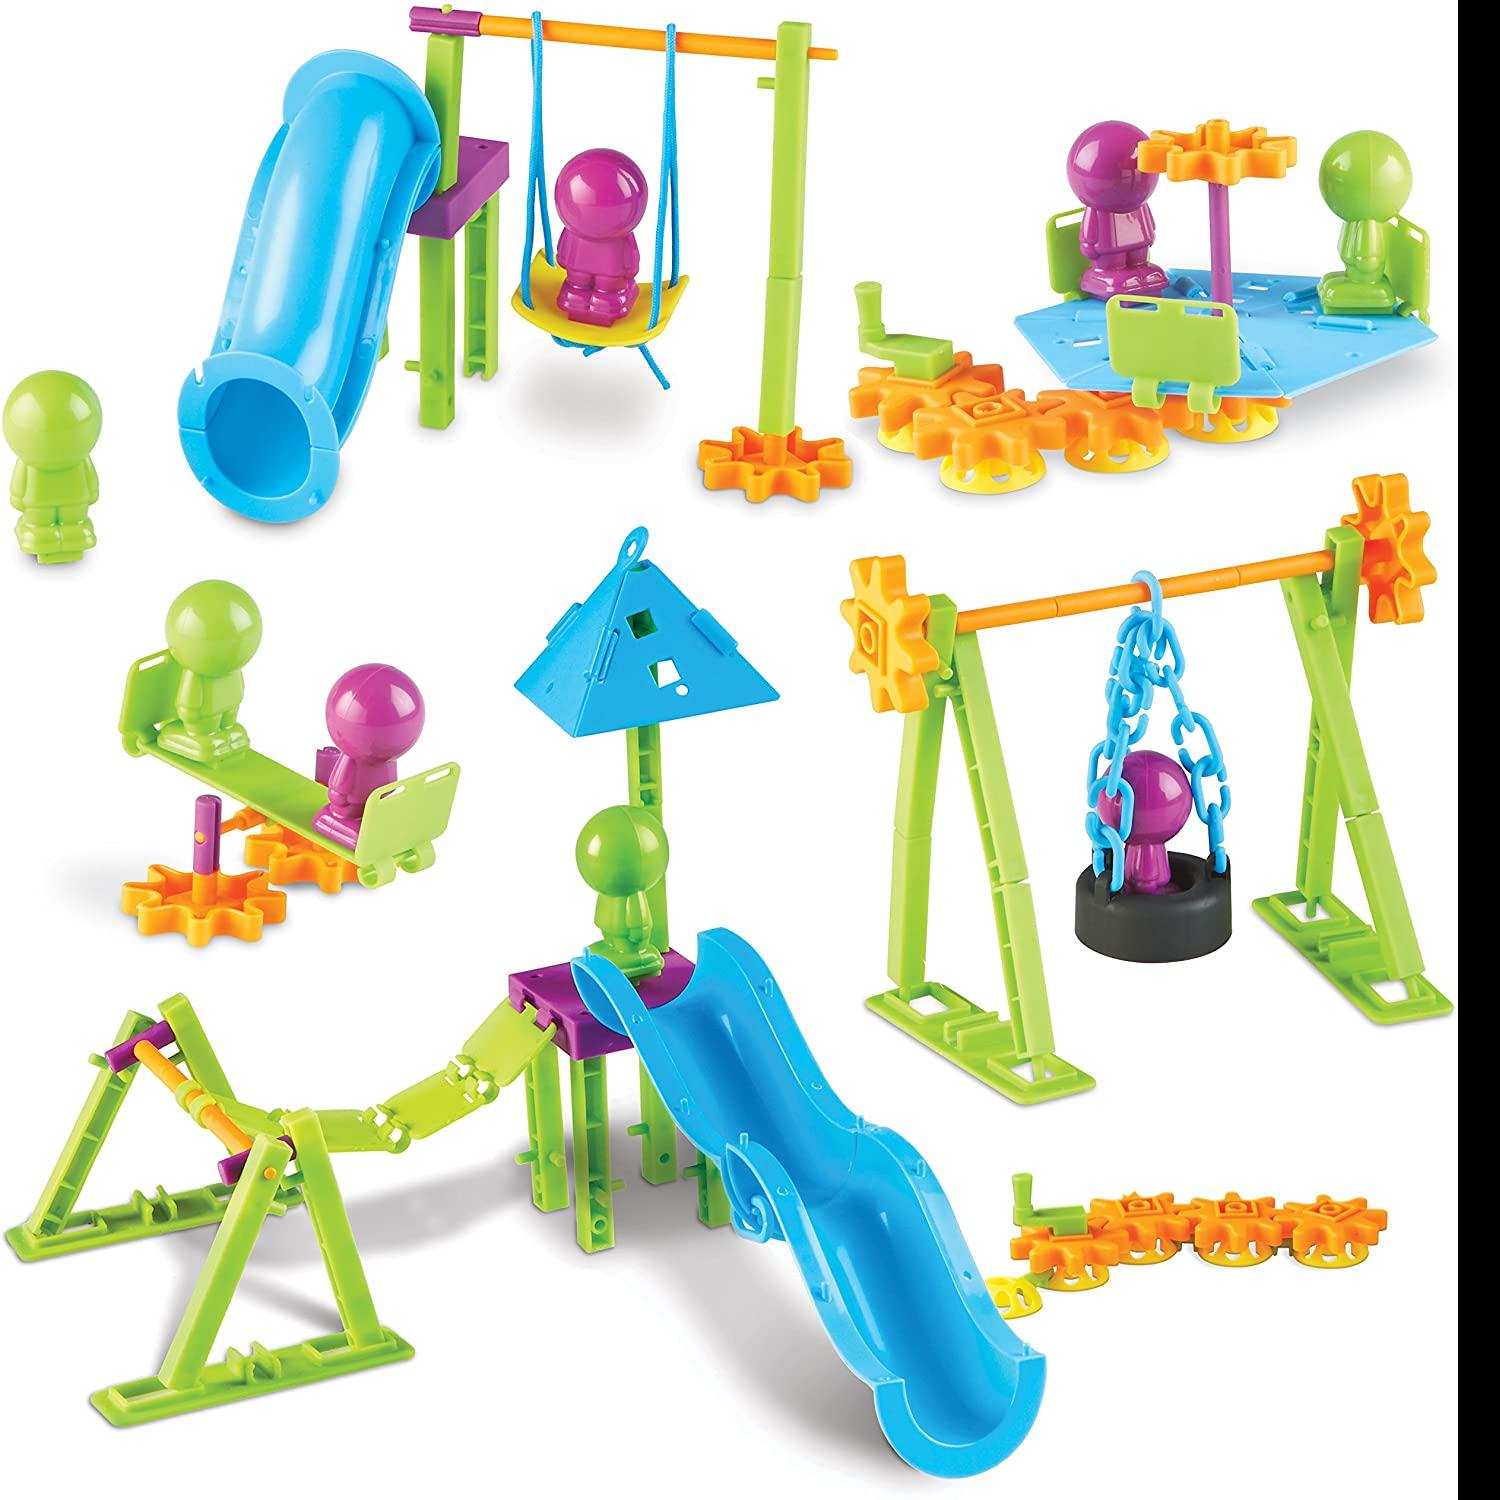 Learning Resources Playground Engineering and Design STEM Building Set for $16.53